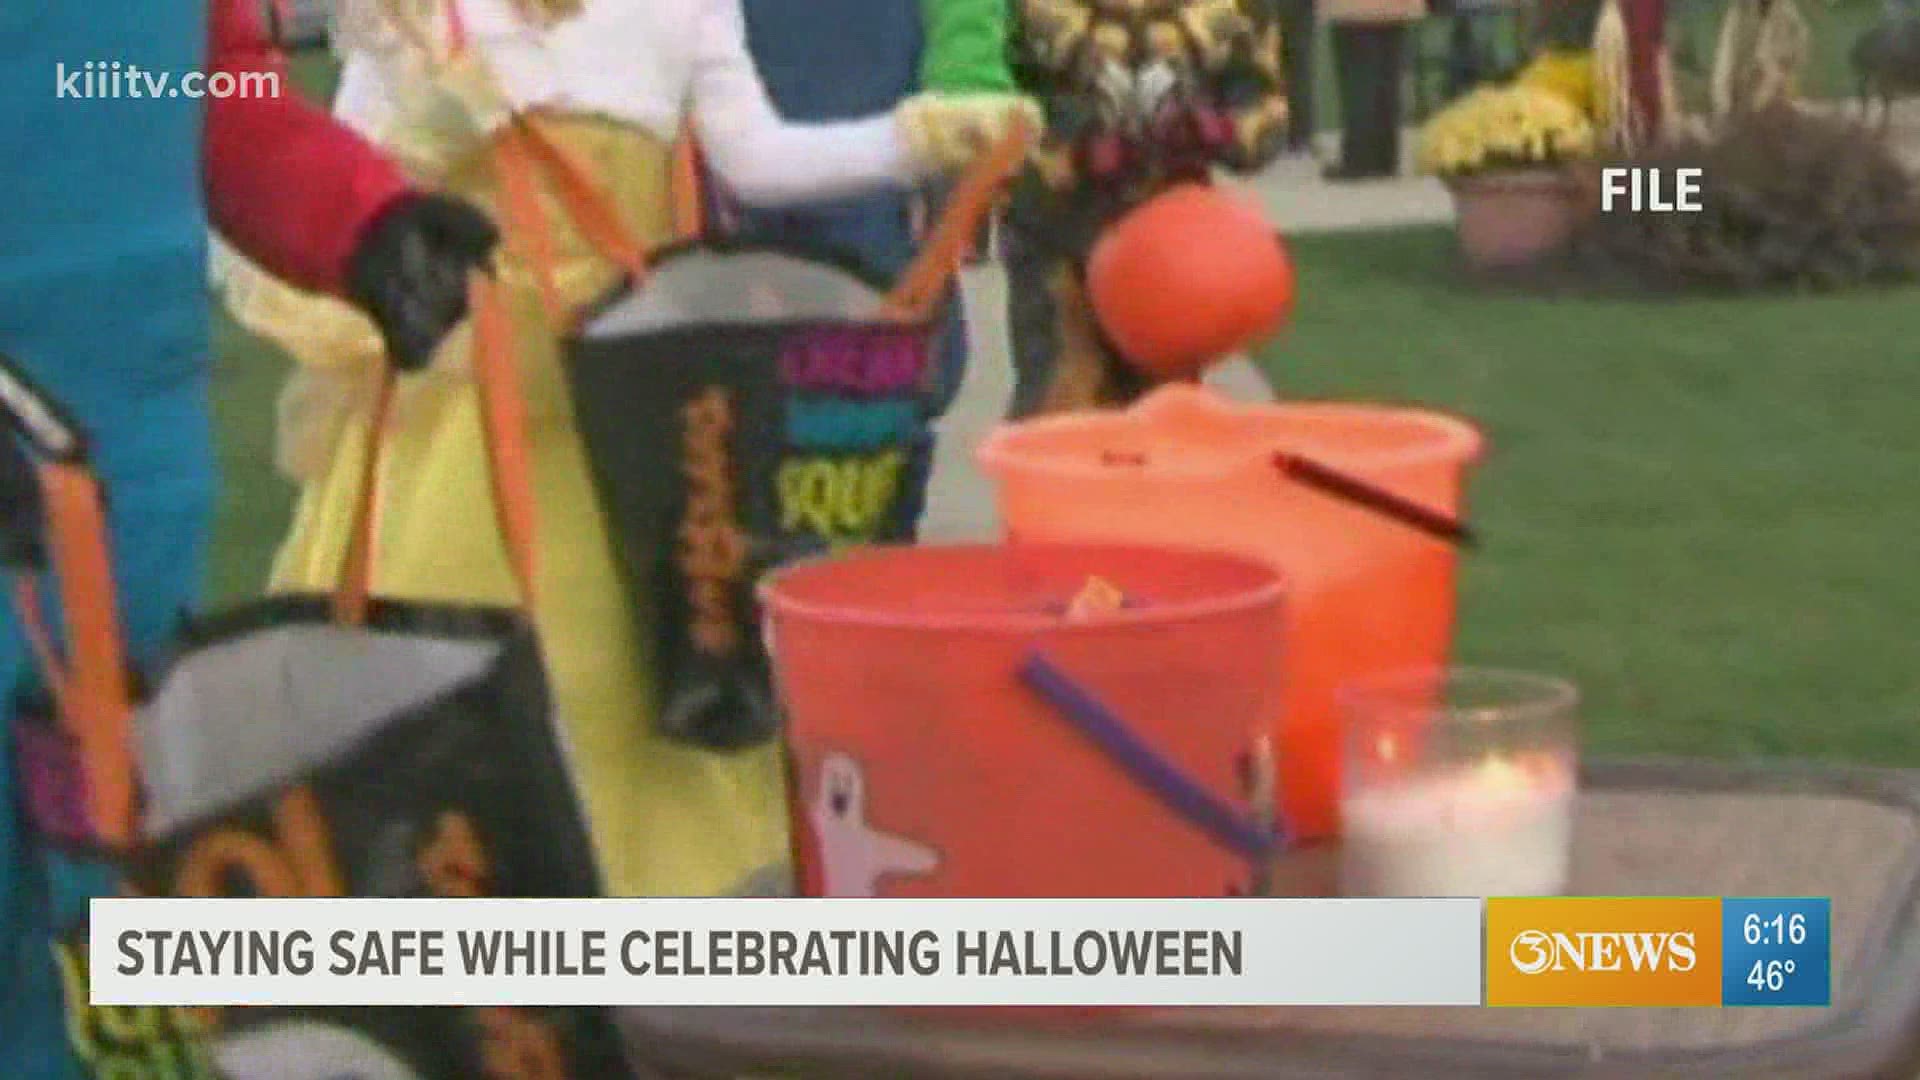 Local school districts suggest how to celebrate safely this Halloween